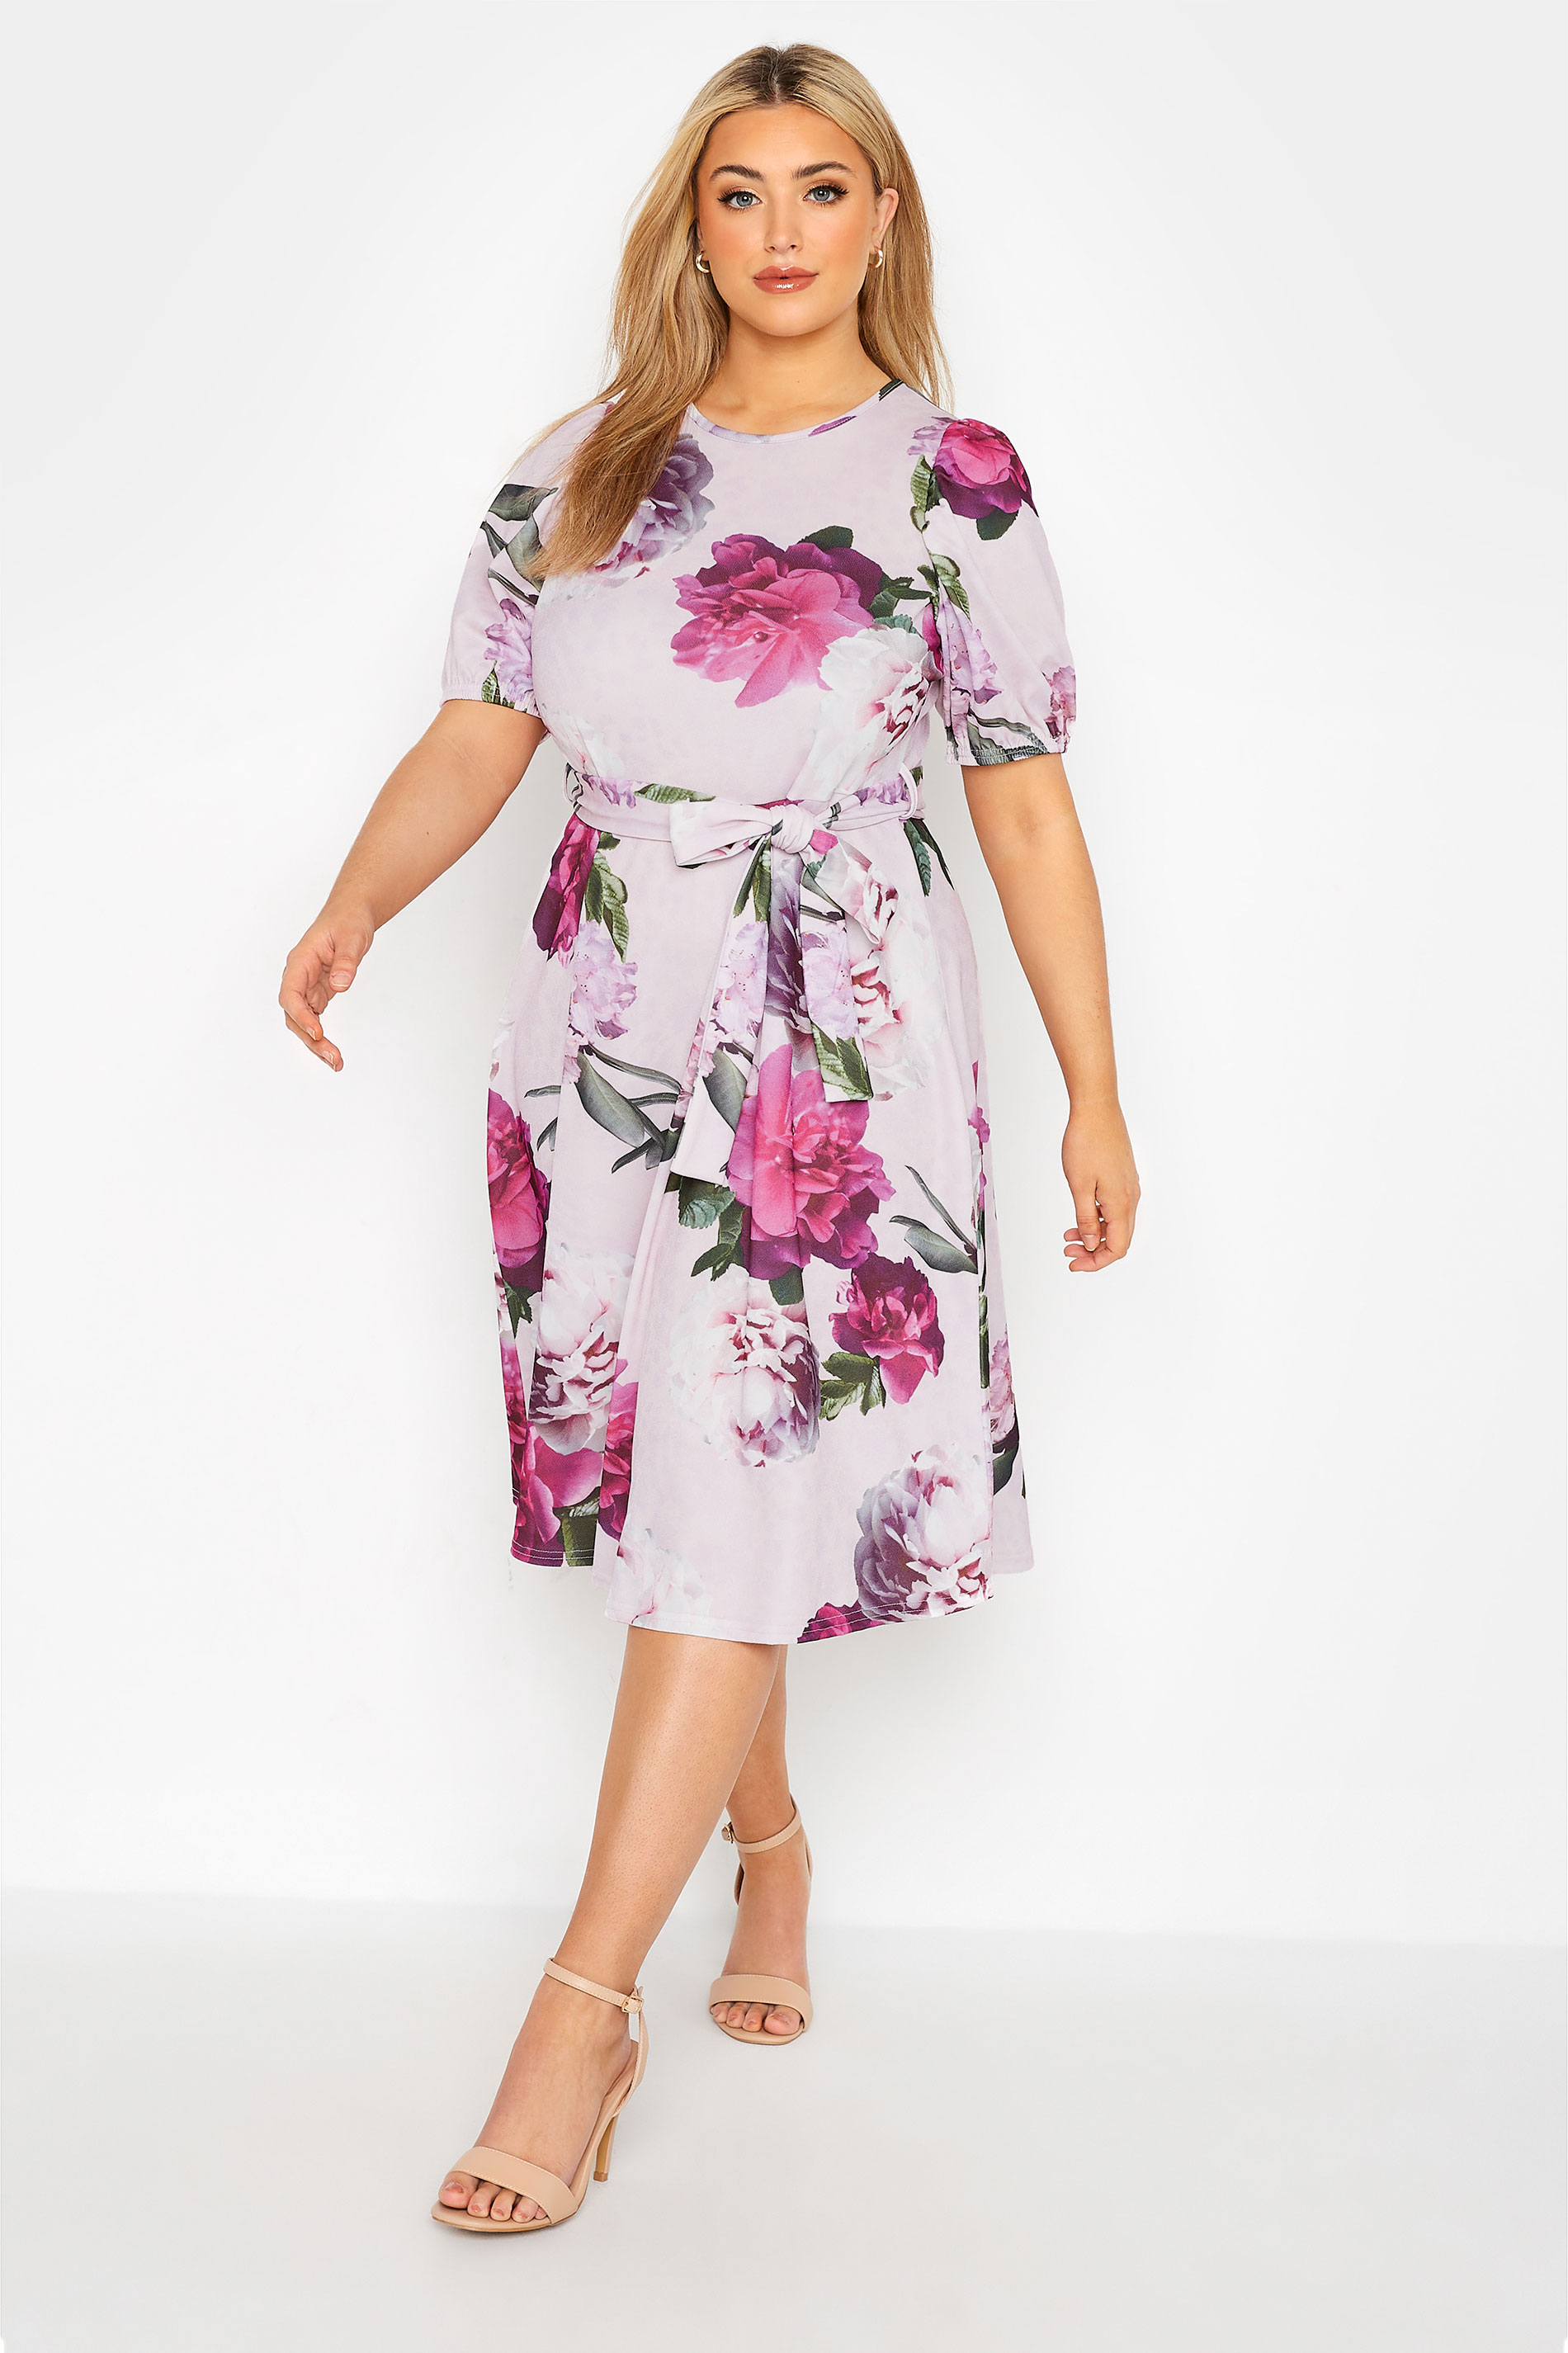 Robes Grande Taille Grande taille  Robes Imprimé Floral | YOURS LONDON - Robe Rose Floral Ceinture Manches Bouffantes - IM18217